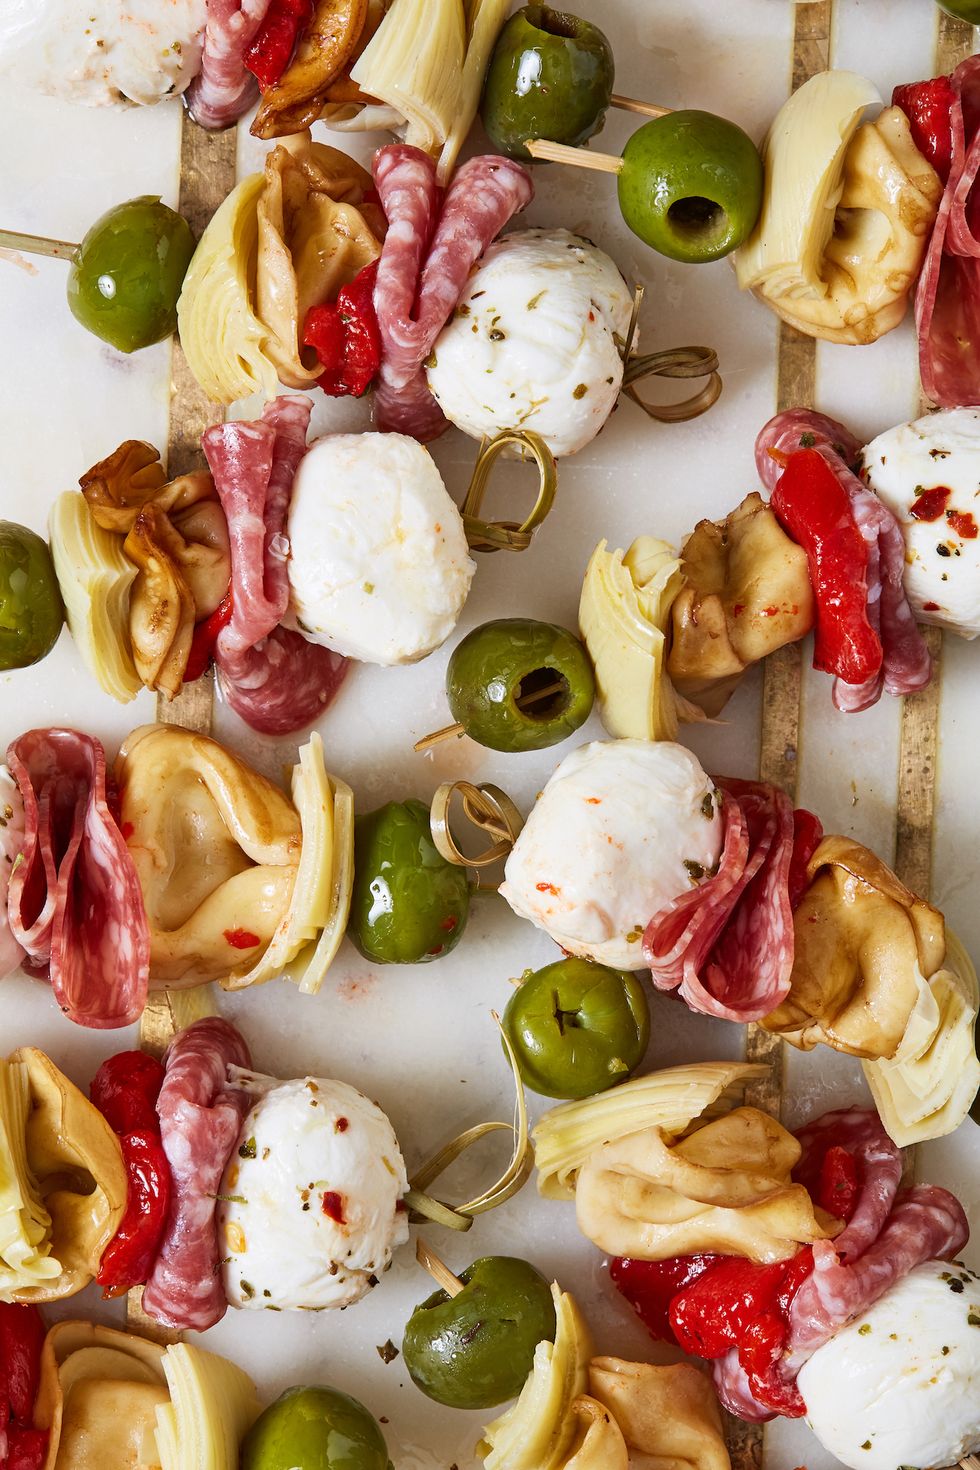 Best finger food recipes: 22 finger food dishes to make your party pop